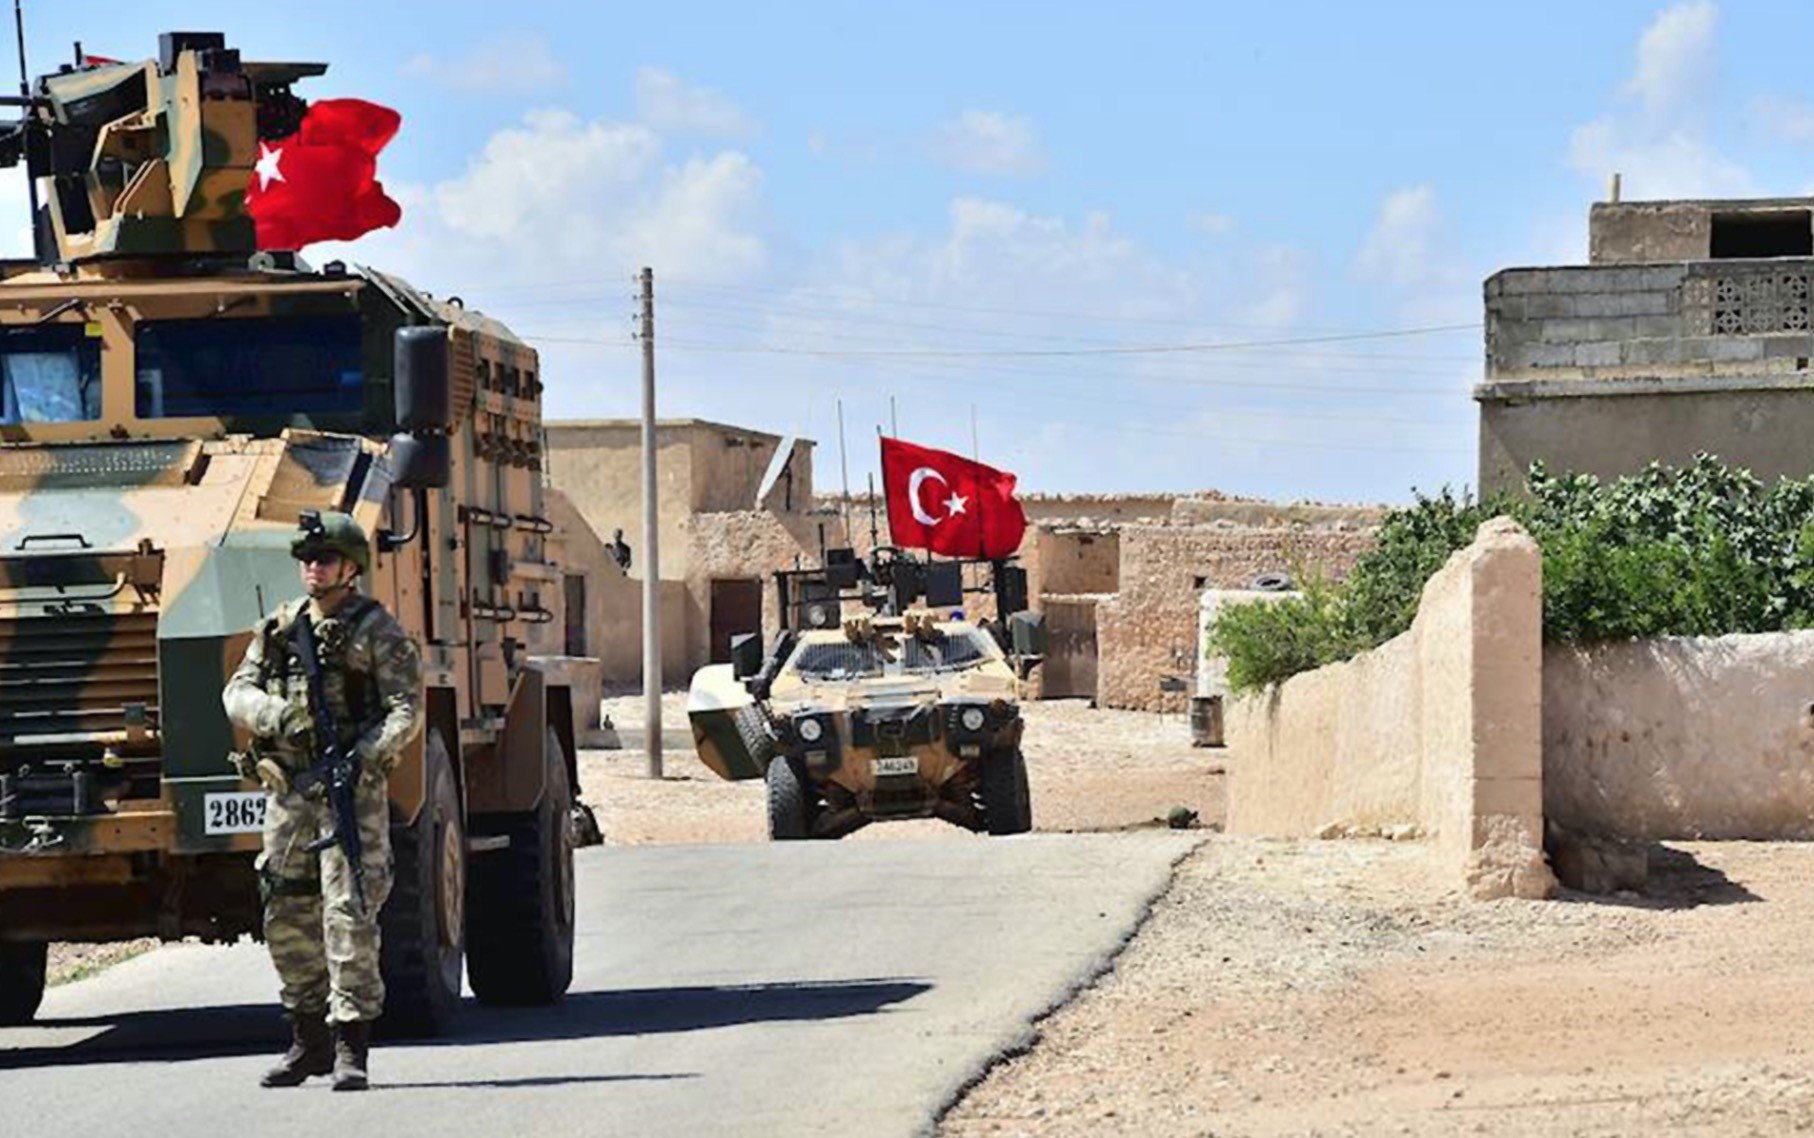 Turkish soldiers accompanied by armored vehicles patrolling near the city of Manbij, northern Syria as the Manbij operation continues with U.S. cooperation, June 18.